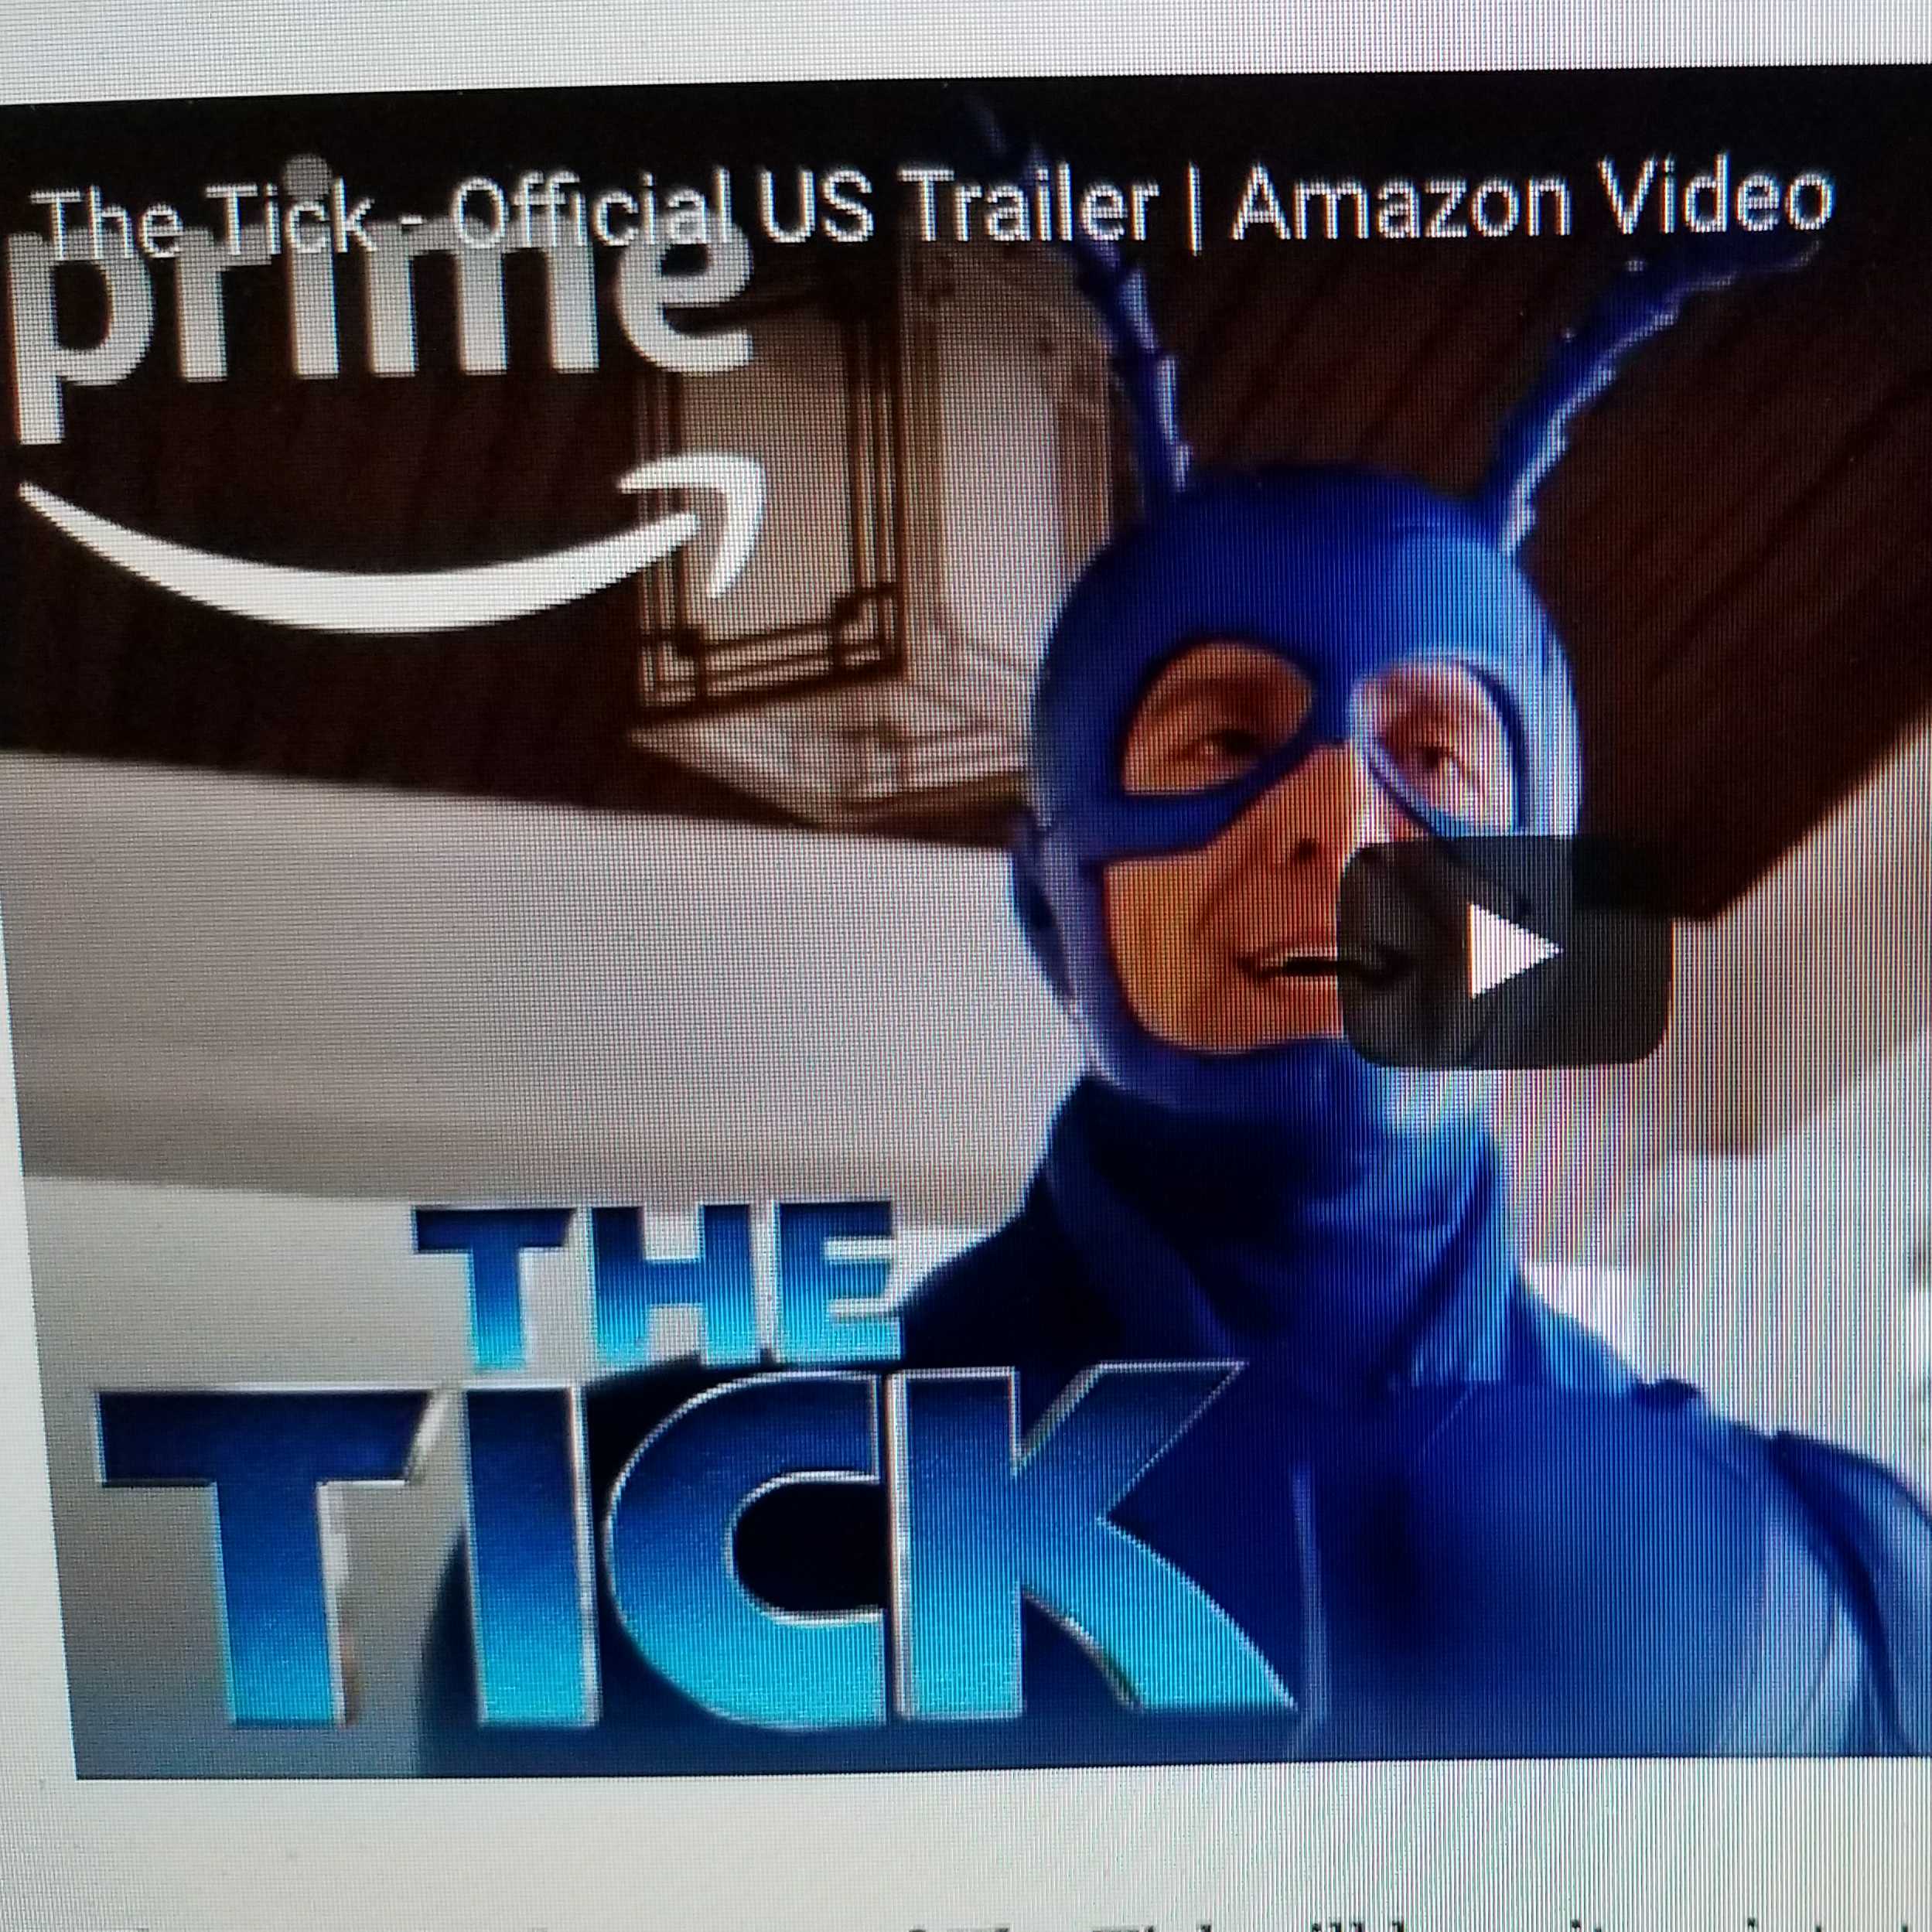 GET YOUR NERD ON NEWS Aug 6, 2017: THE TICK ON AMAZON IS BACK LIVE ACTION